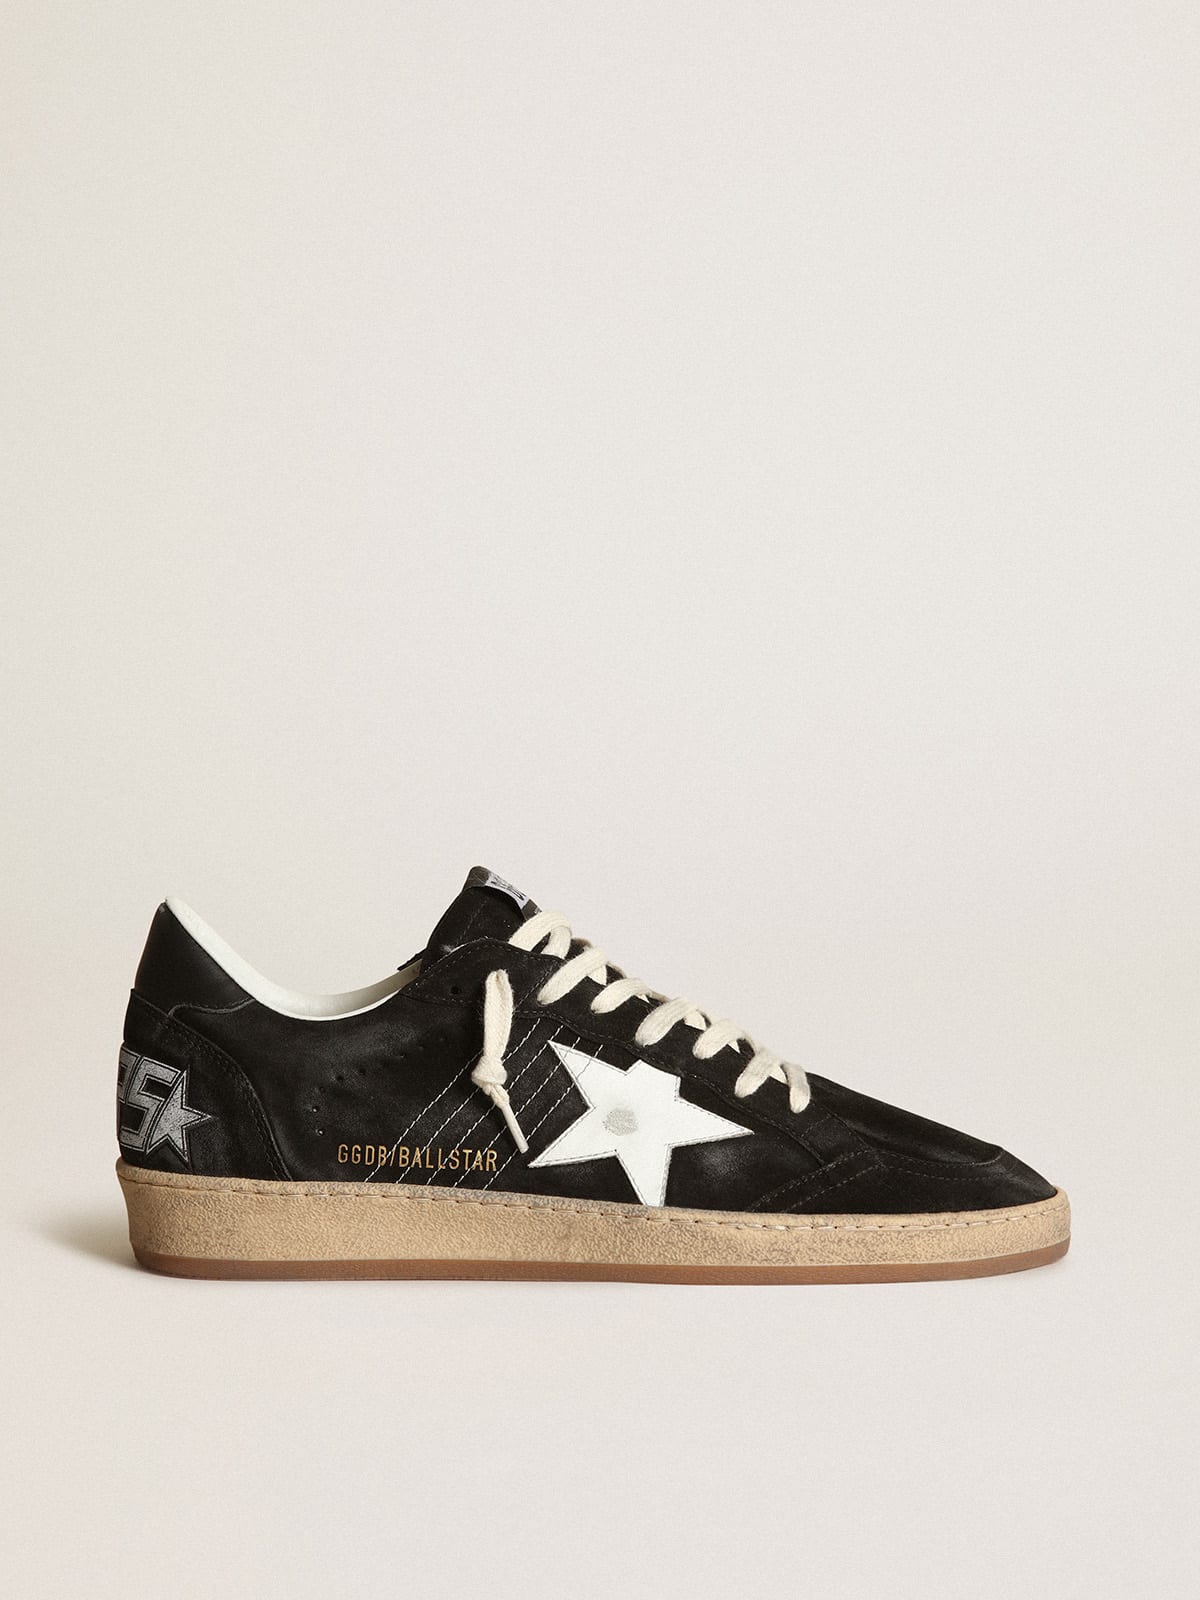 Men's Ball Star sneakers in black suede with white leather star and black leather heel tab